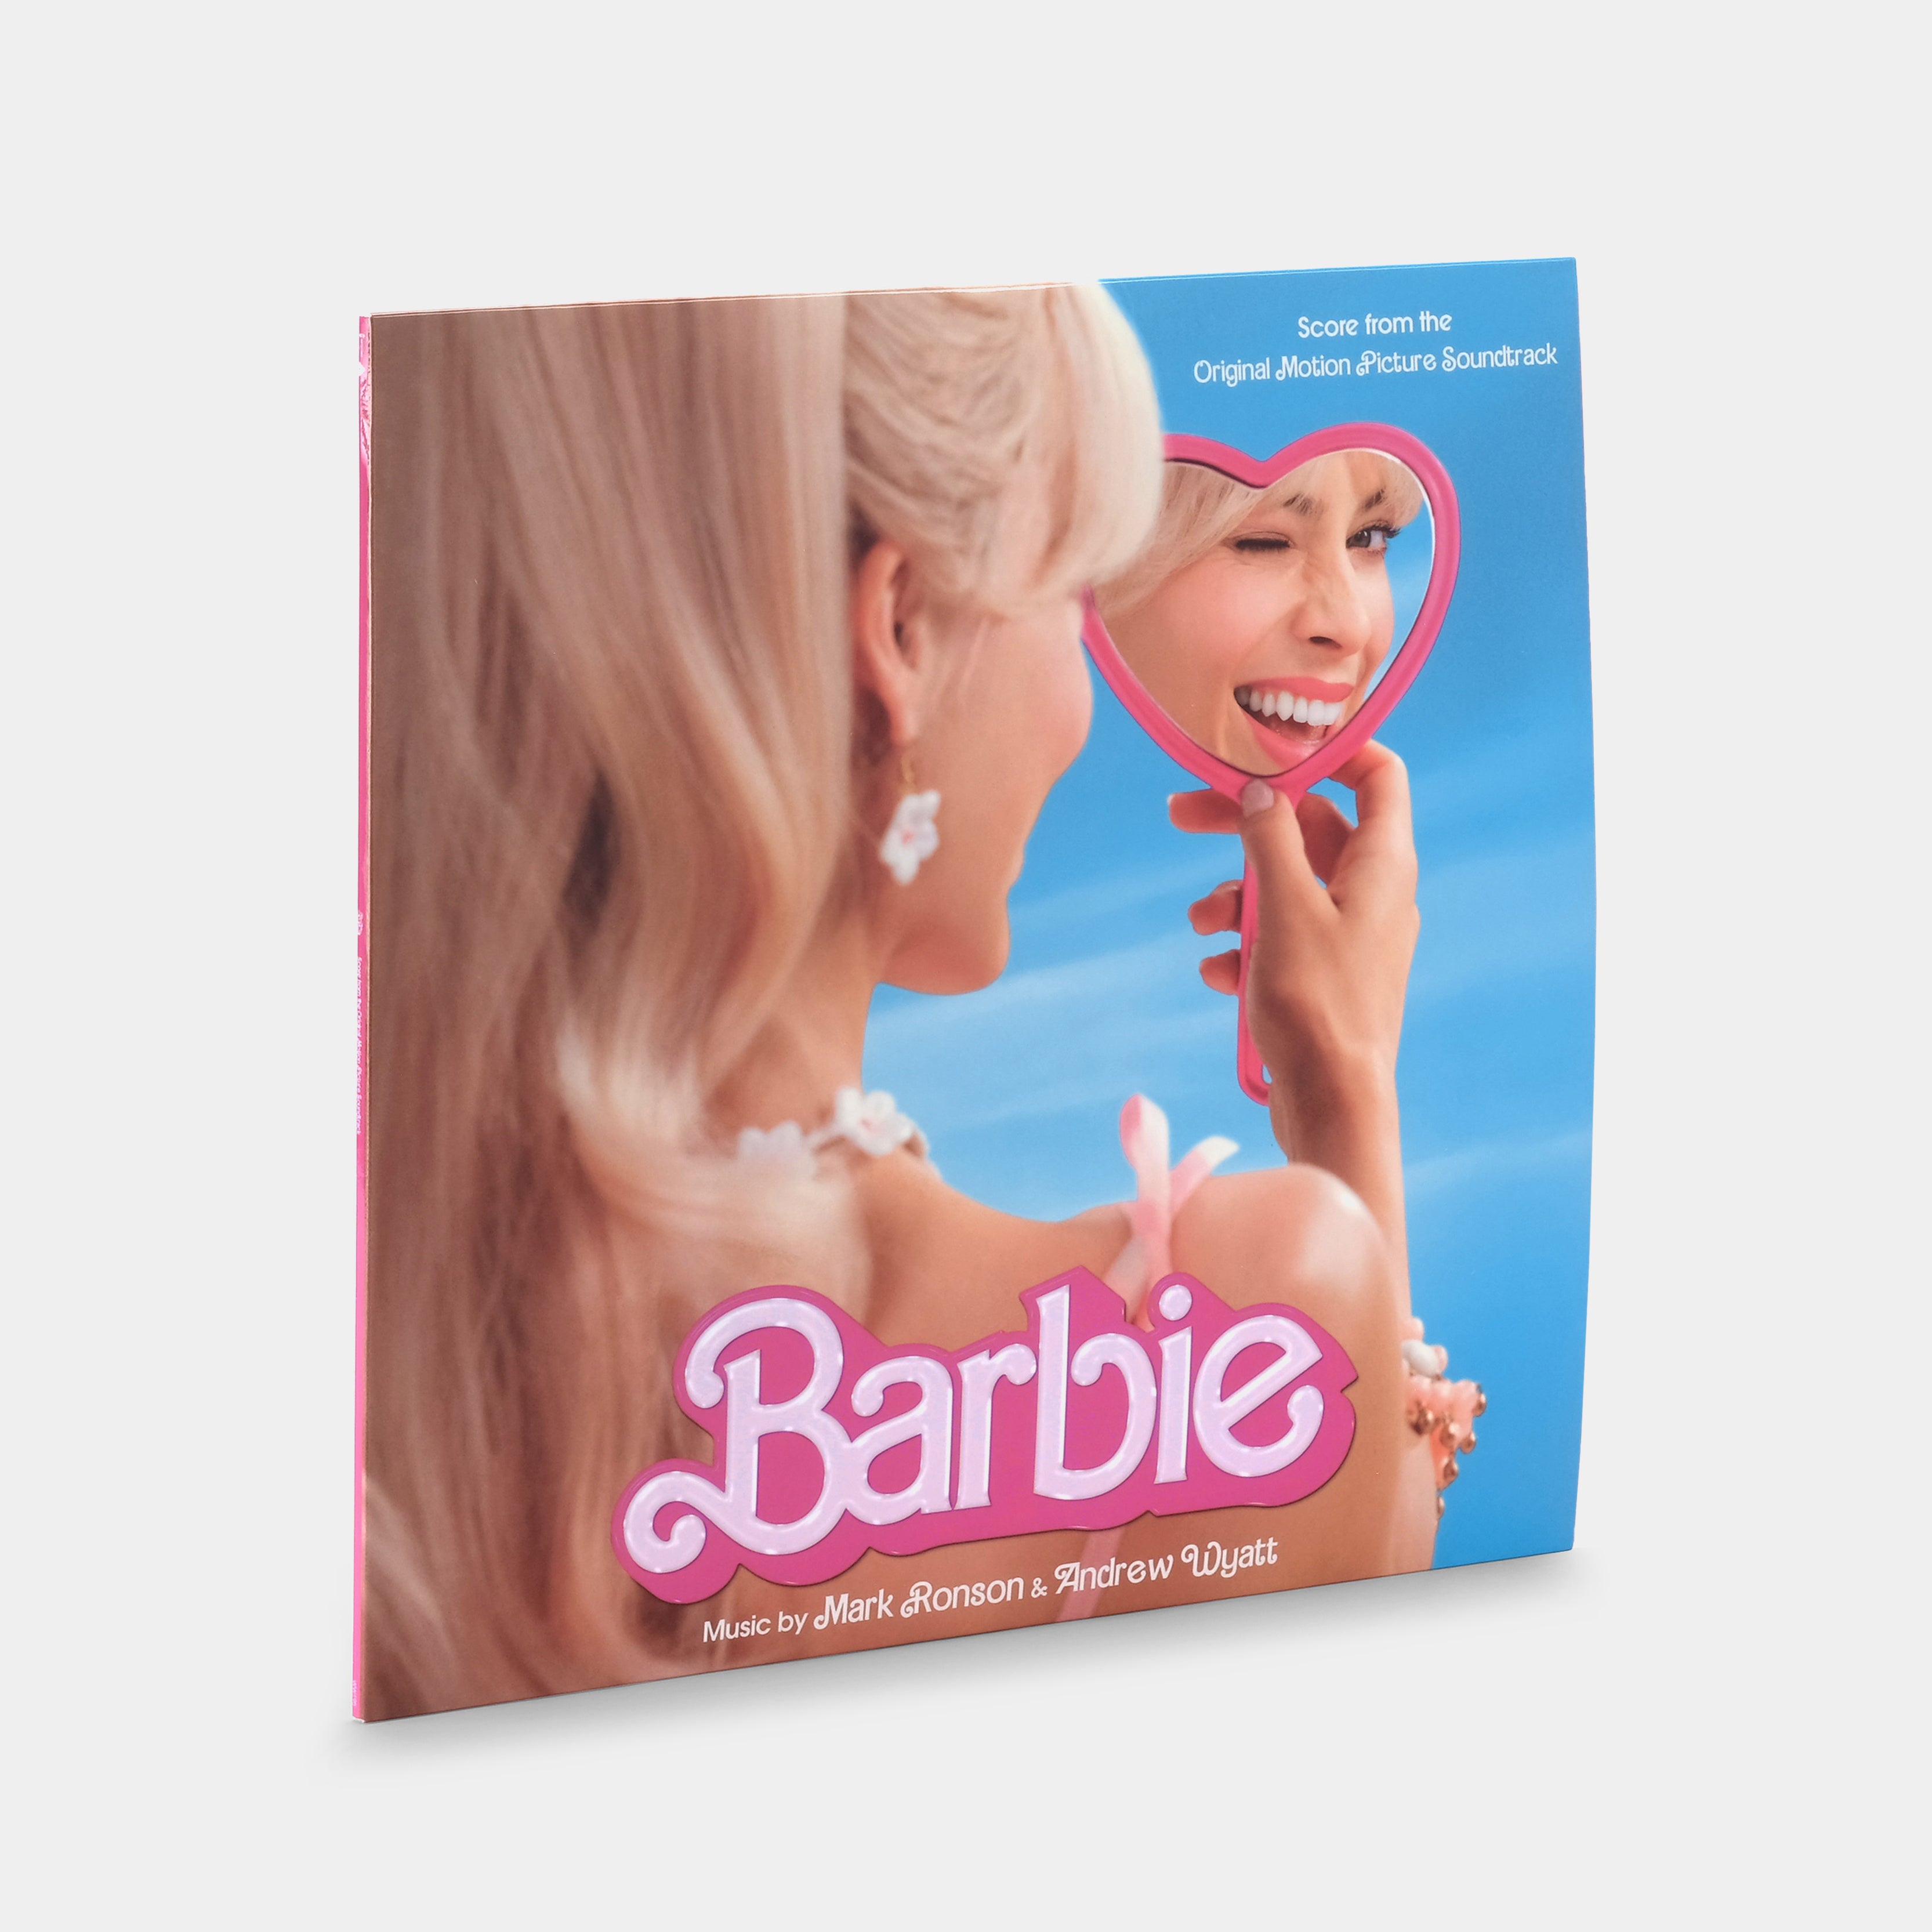 Mark Ronson, Andrew Wyatt - Barbie (Score From The Original Motion Picture Soundtrack) LP Neon Barbie Pink Vinyl Record